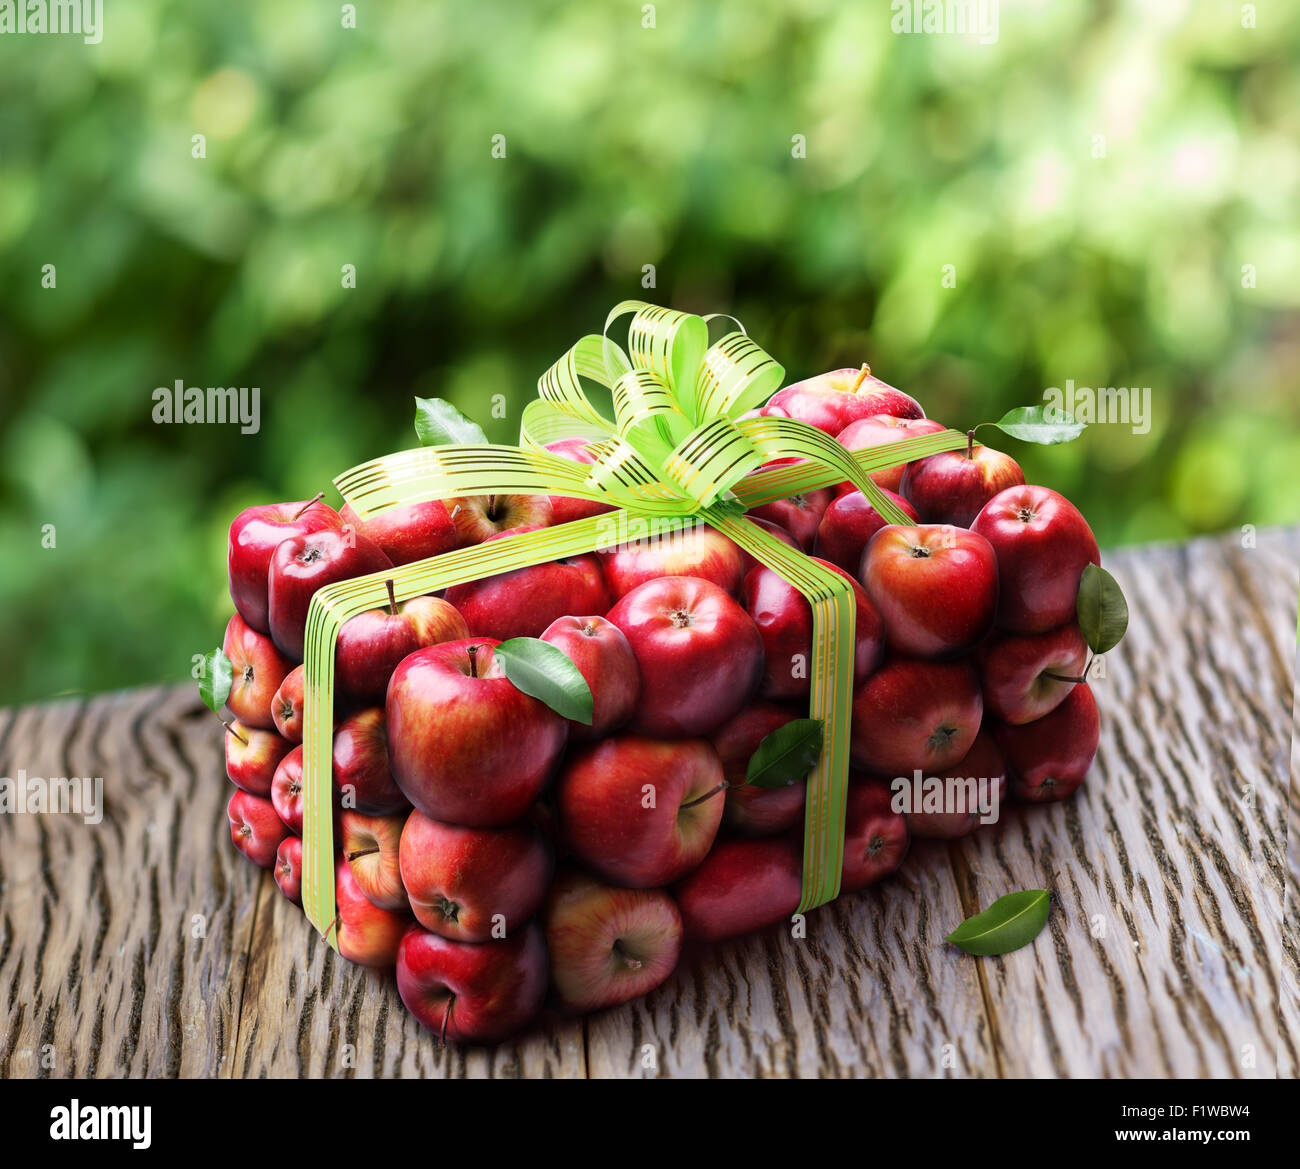 Apple gift box with green bow on the wooden table. Stock Photo